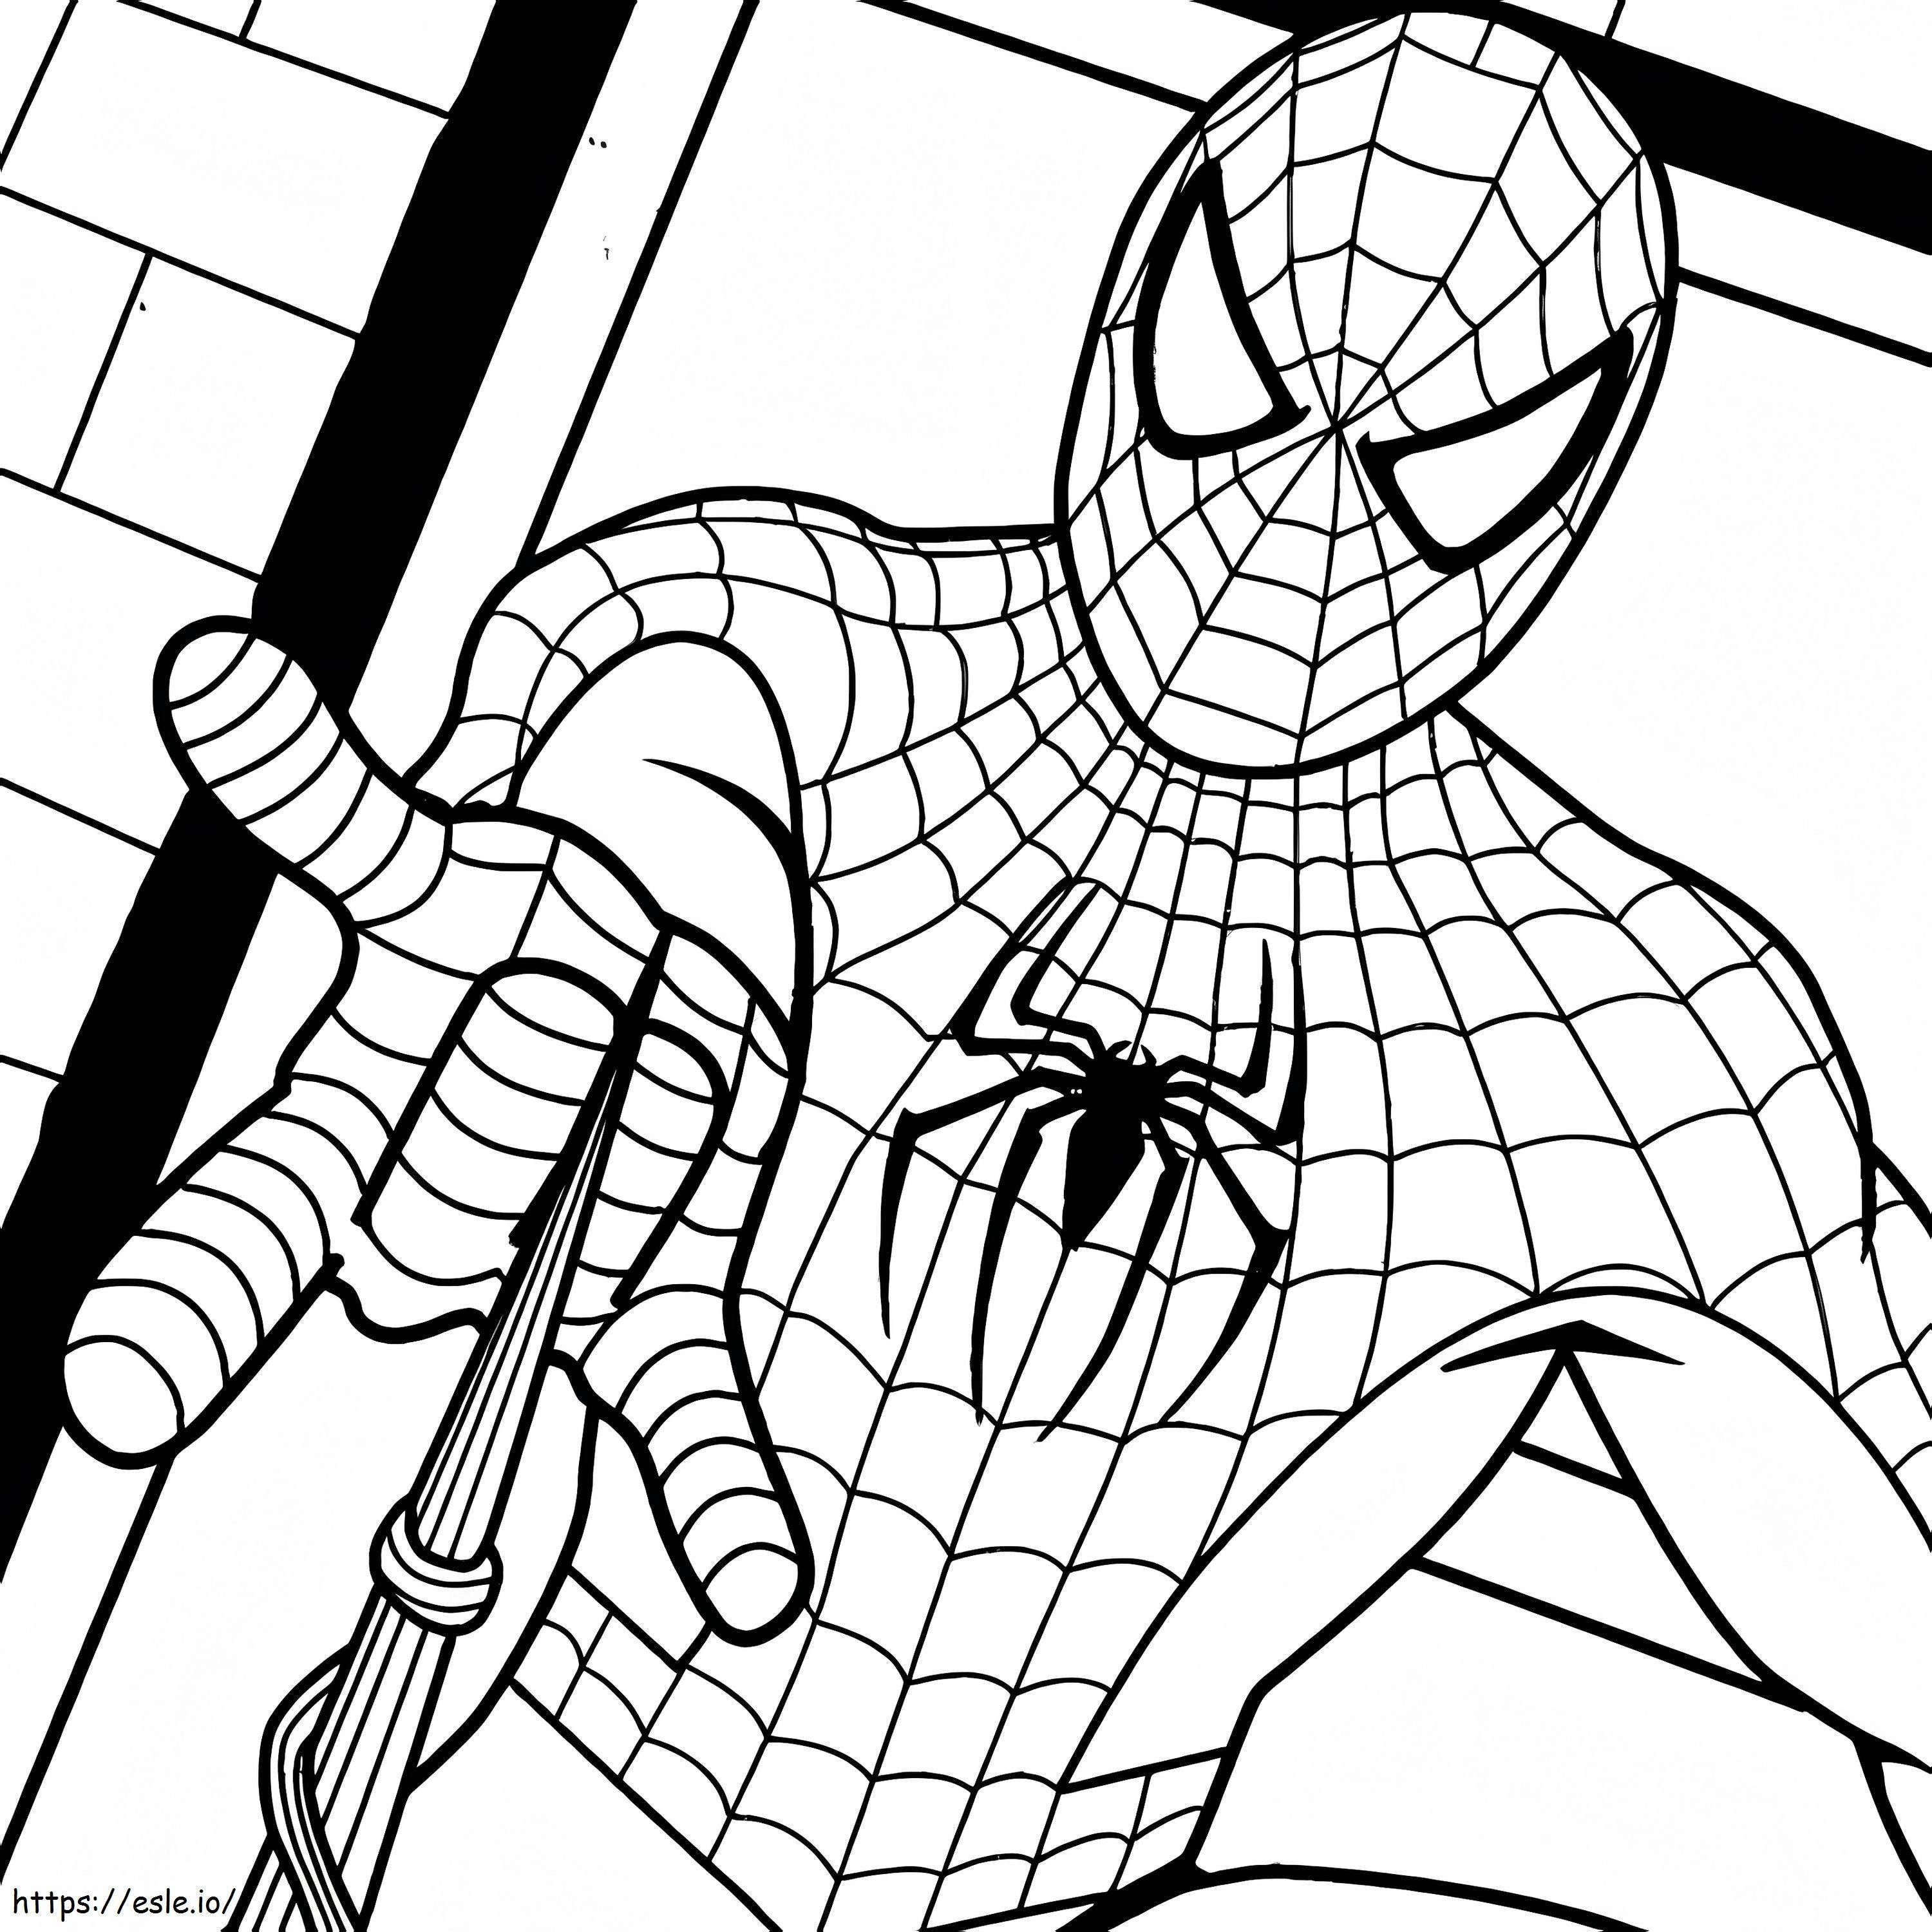 Child Spider Man coloring page